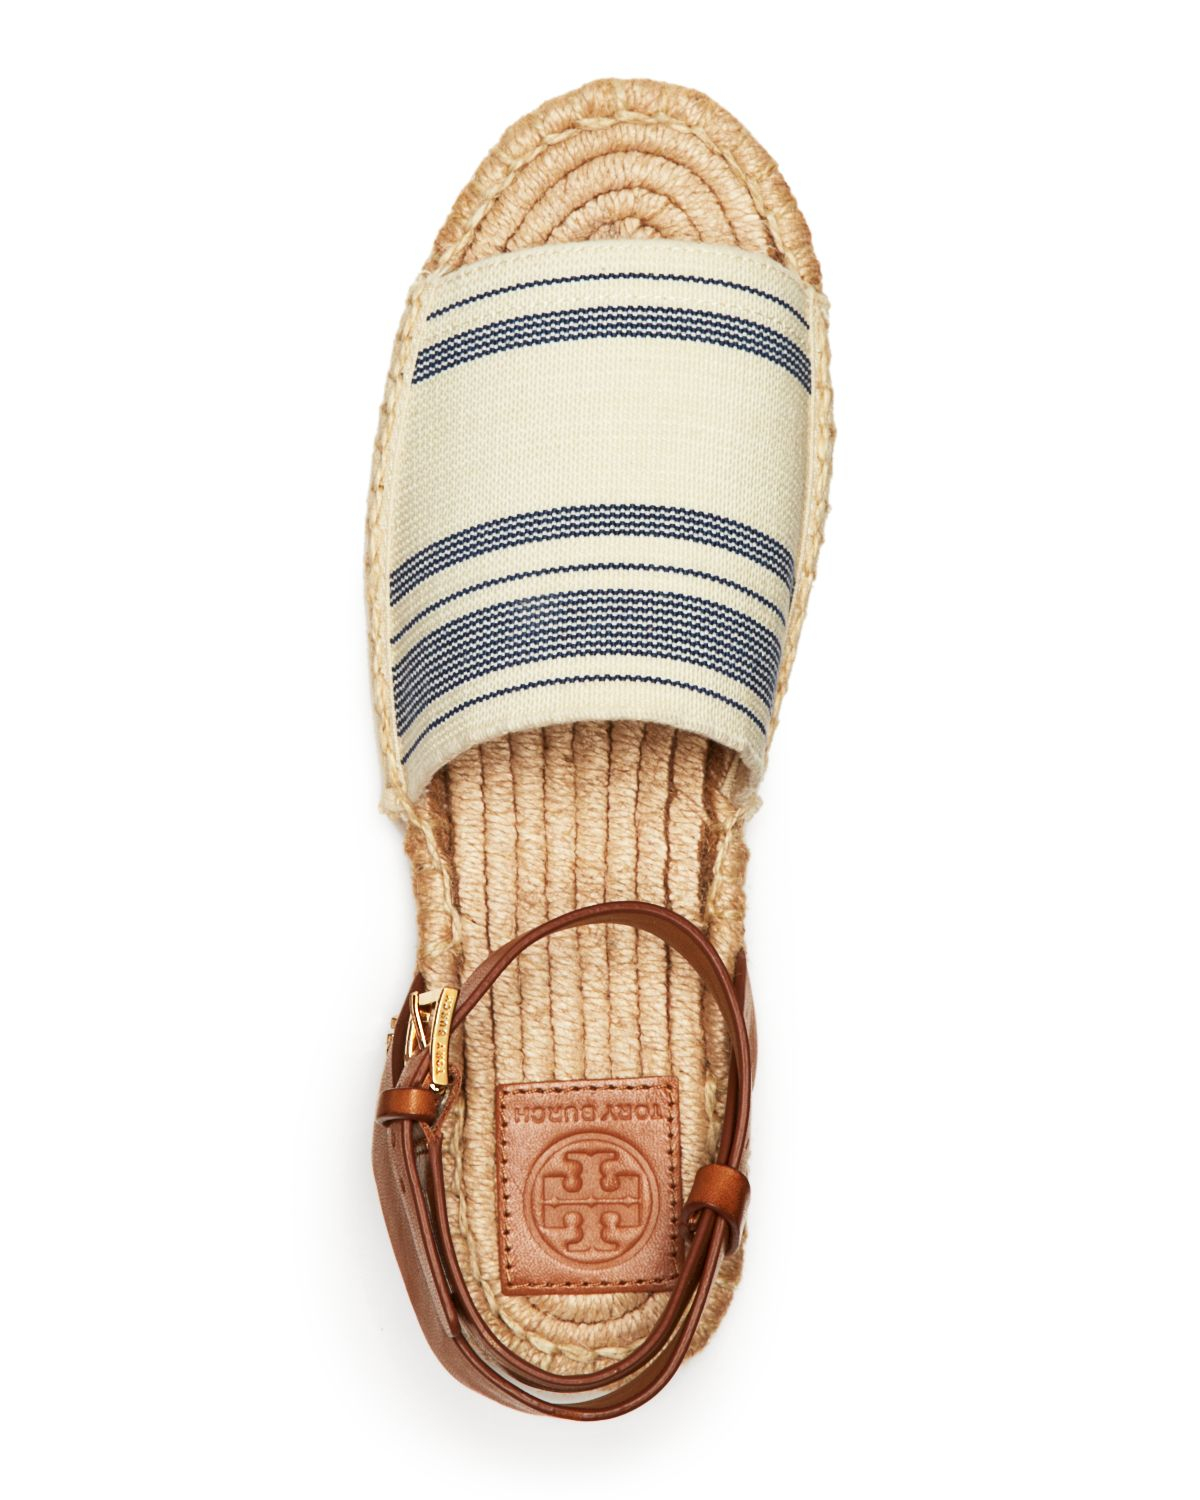 Tory Burch Espadrille Flat Sandals - Striped Ankle Strap in White - Lyst